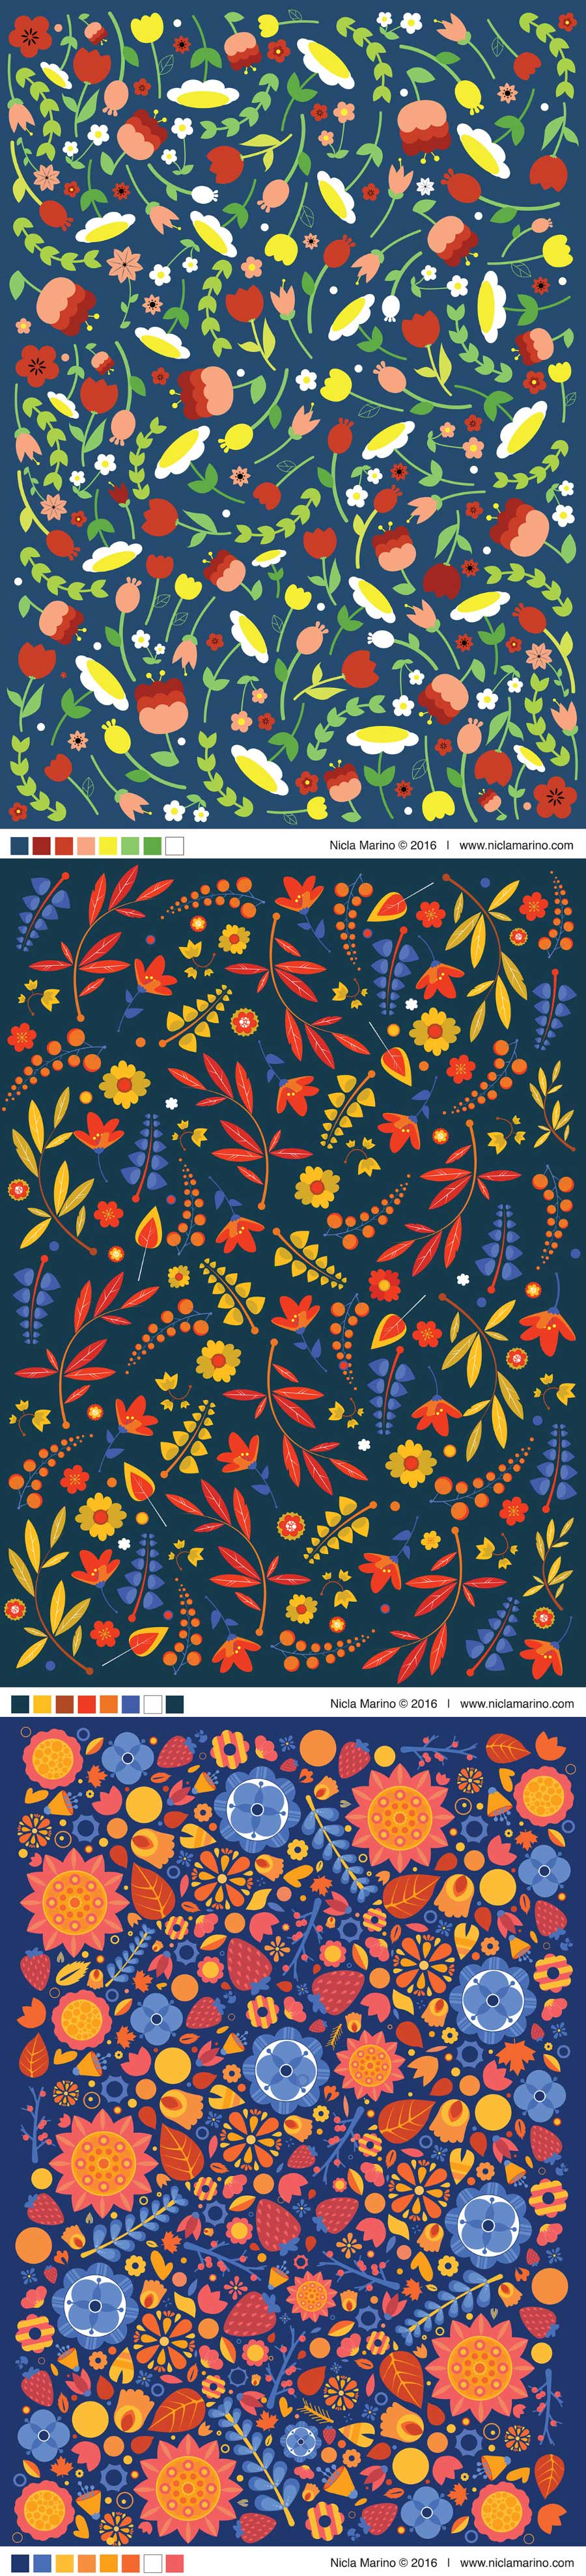 Free-Resources-–-Floral-Patterns-for-Artists